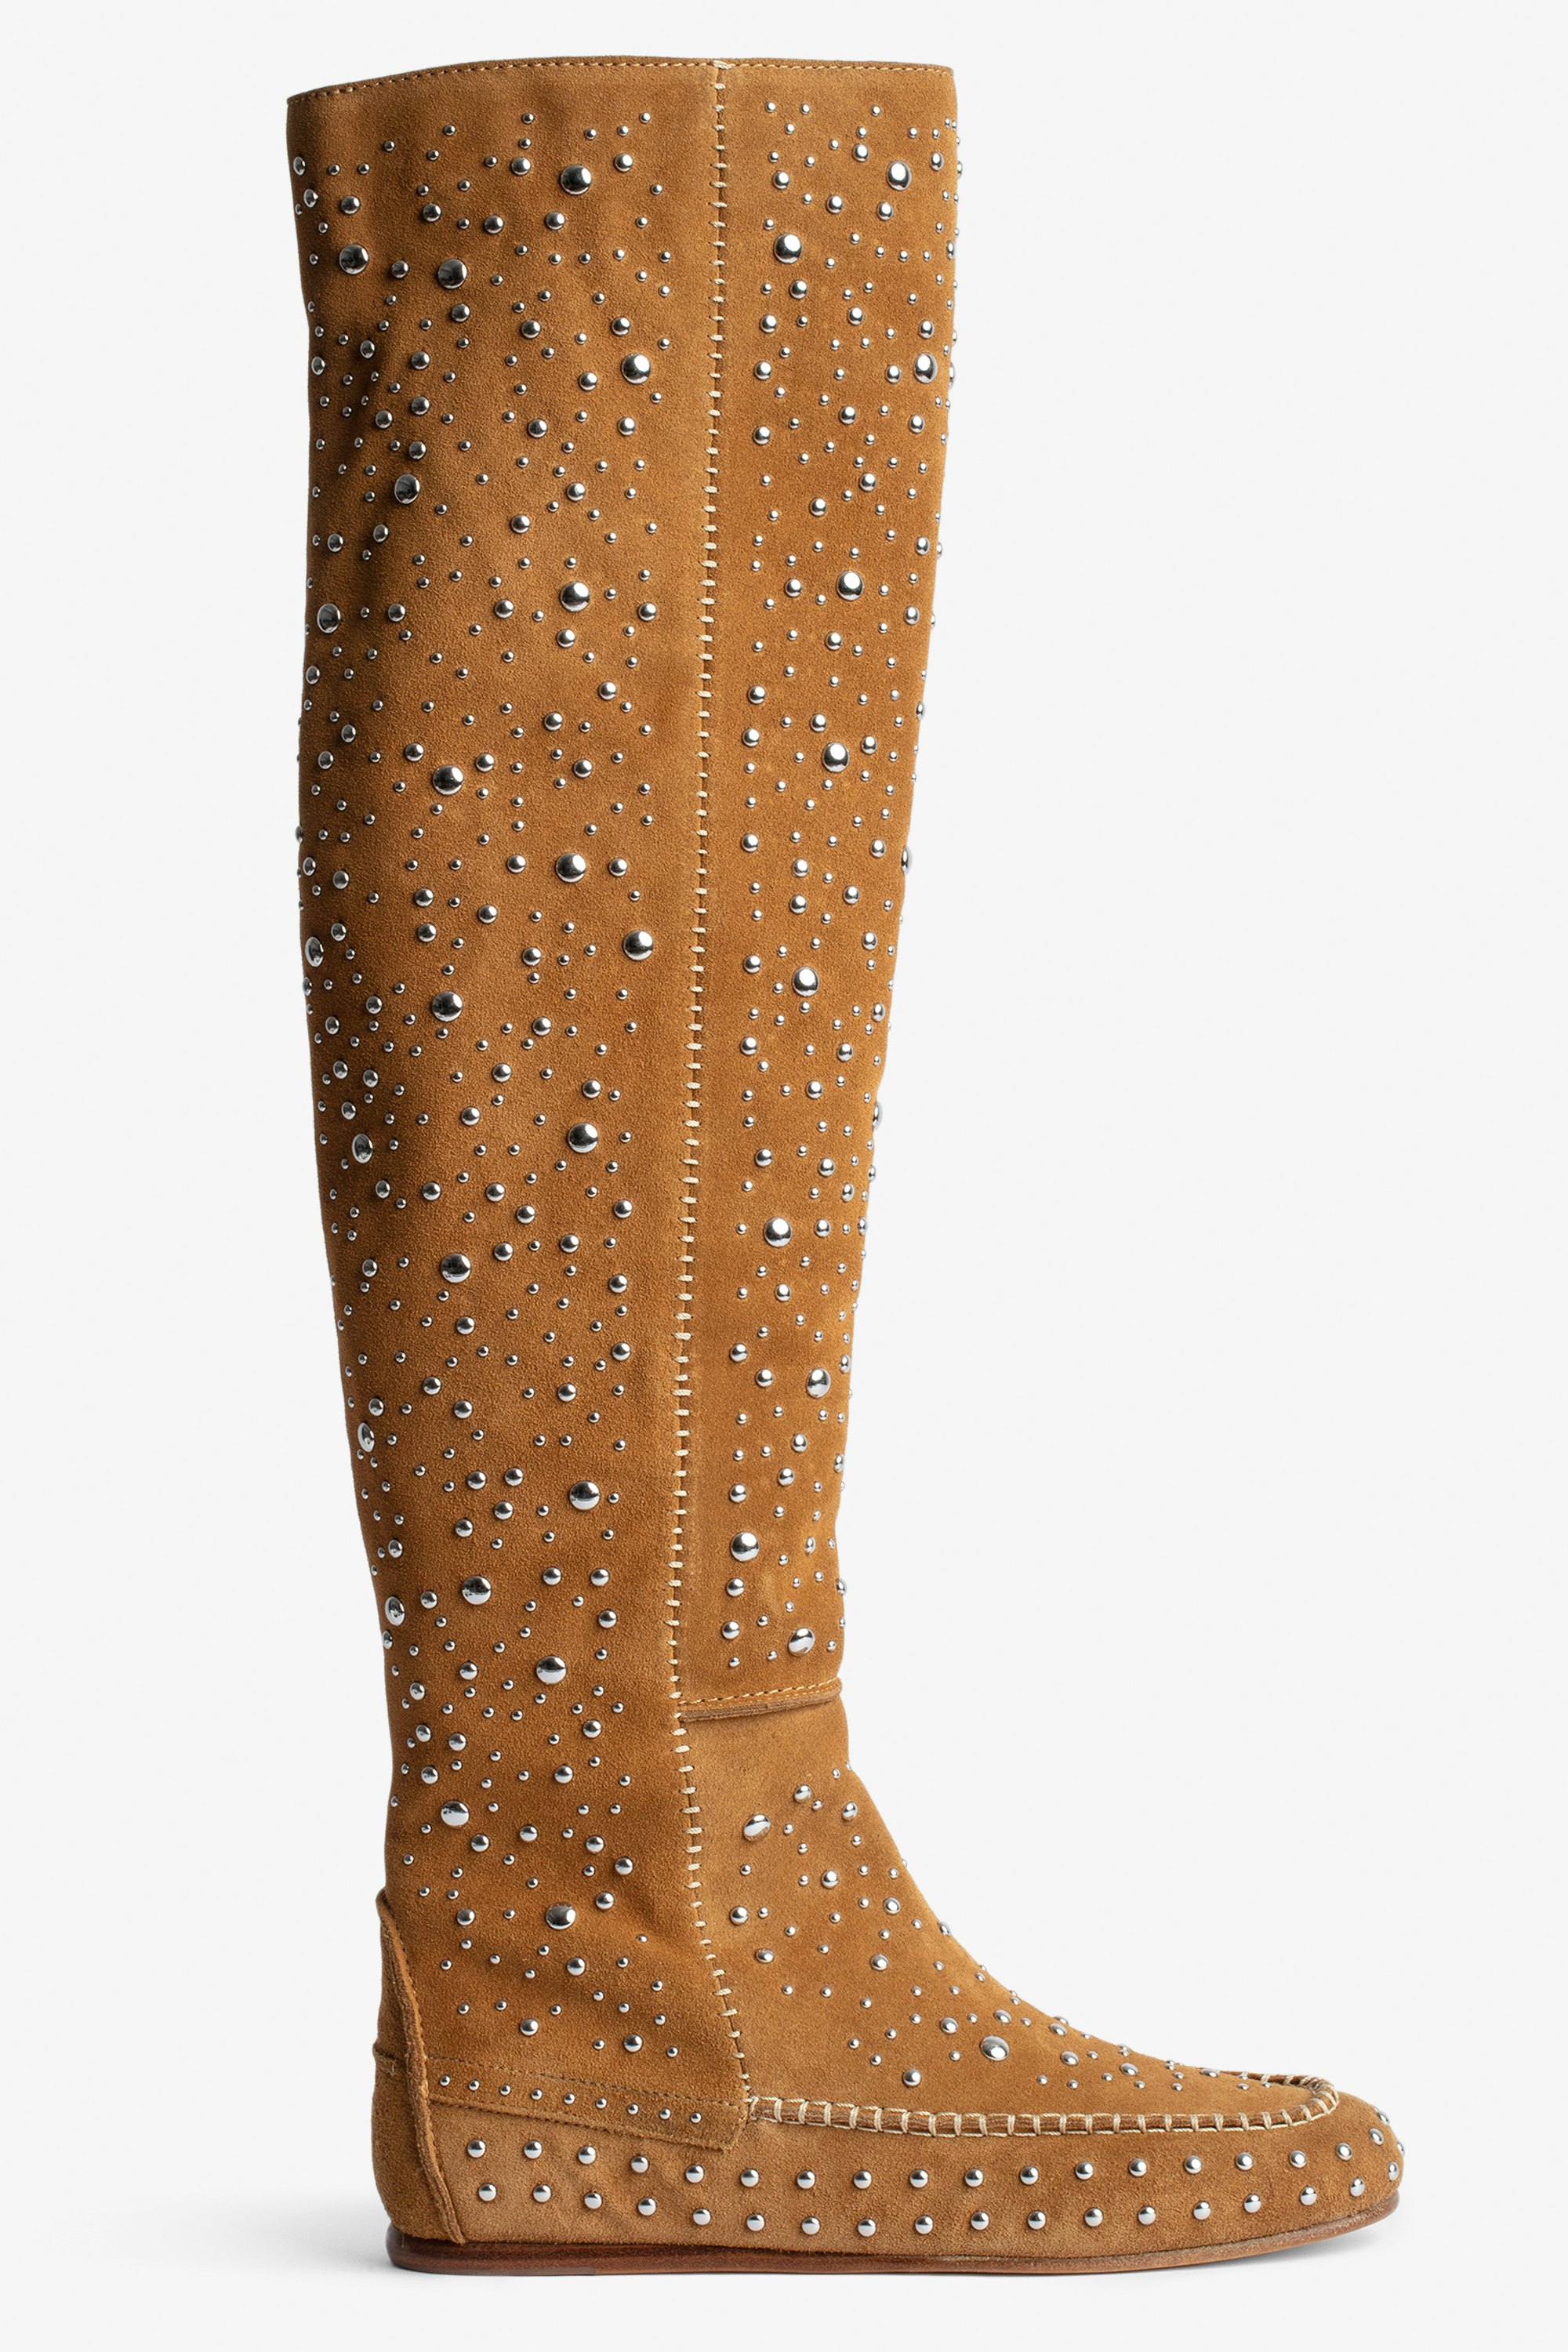 Santa Boots Women’s brown suede knee-high boots with silver-tone studs and topstitching